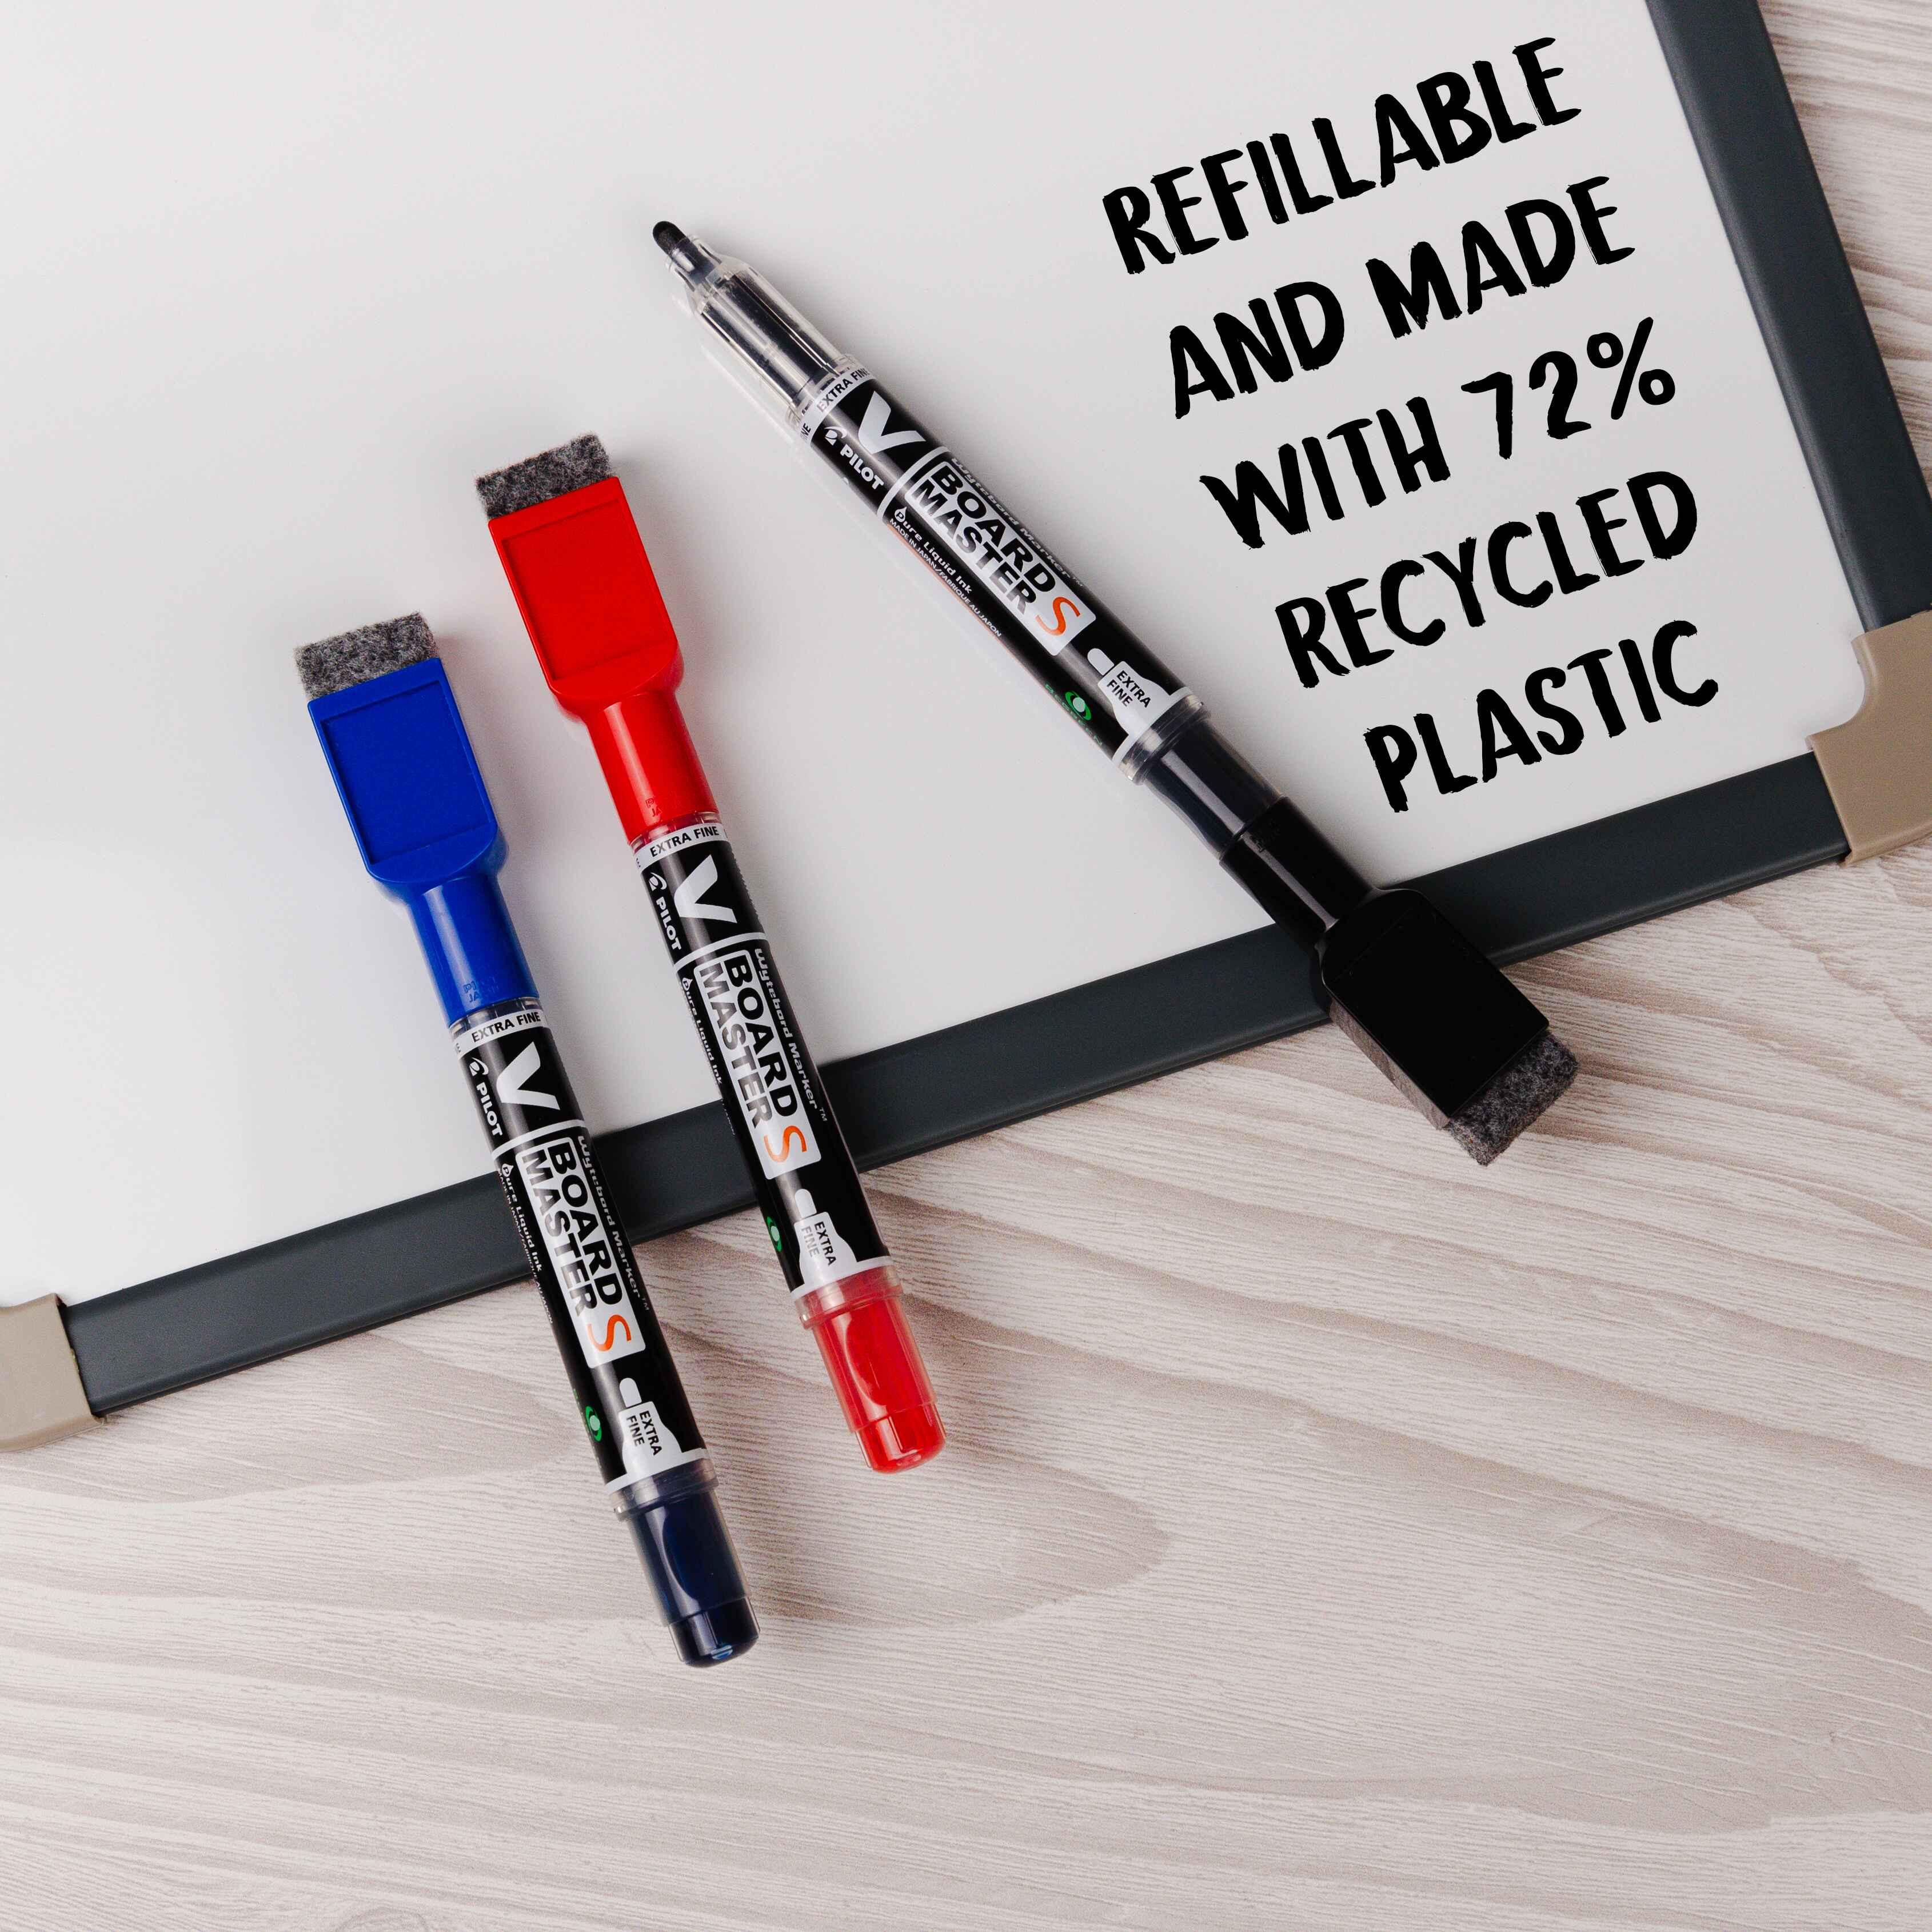 V Board Master S with Eraser and Magnet | BegreeN whiteboard markers with message written on board saying "Refillable and made with 72% recycled plastic". Highlighting why they are the best whiteboard markers for eco-friendly use